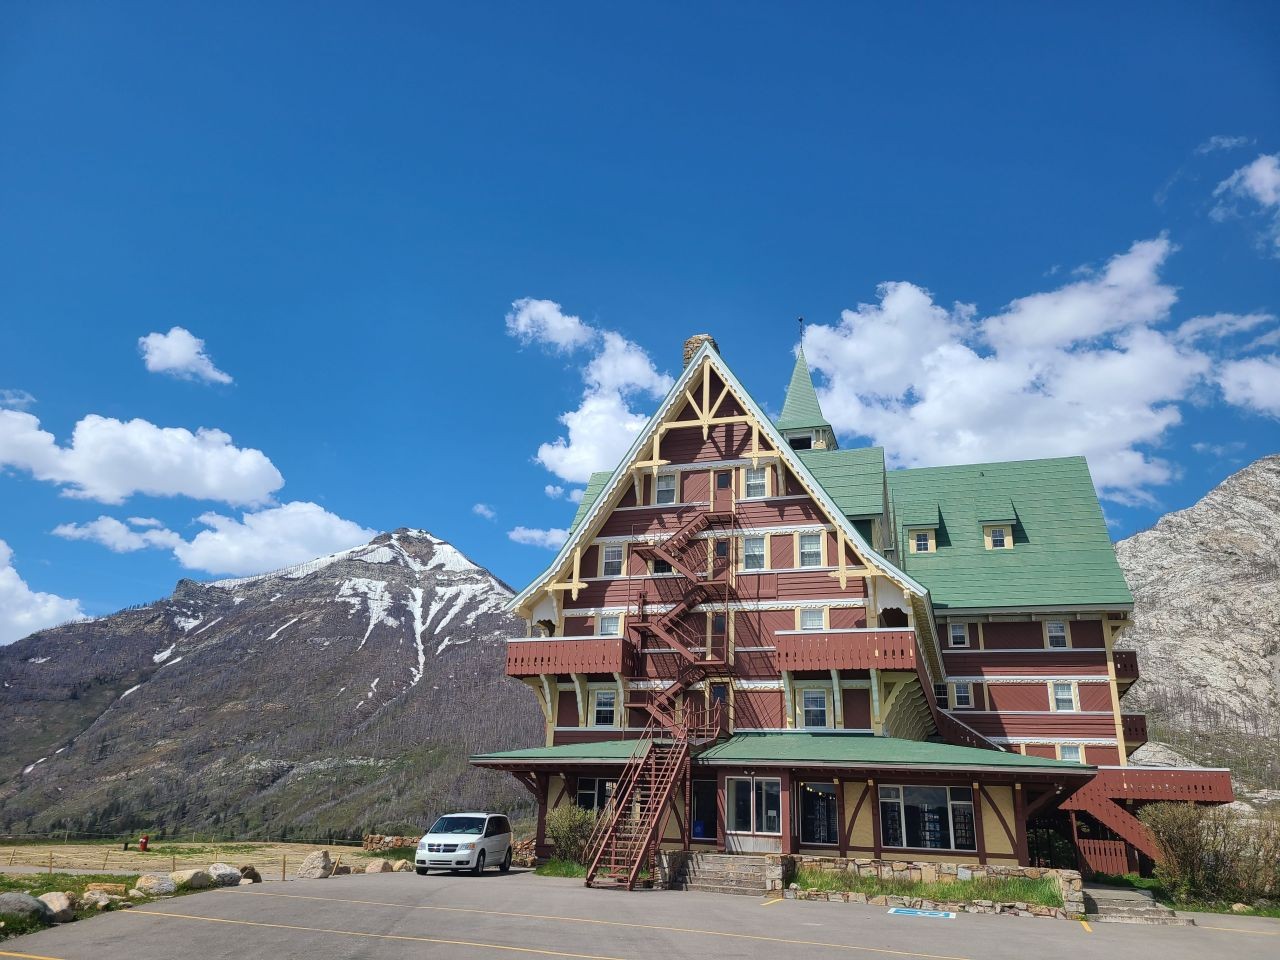 An iconic hotel in Waterton Lakes National Park of Canada. Book an accommodation or a wedding at this gorgeous venue. Also featuring restaurants, afternoon tea and ghost stories!